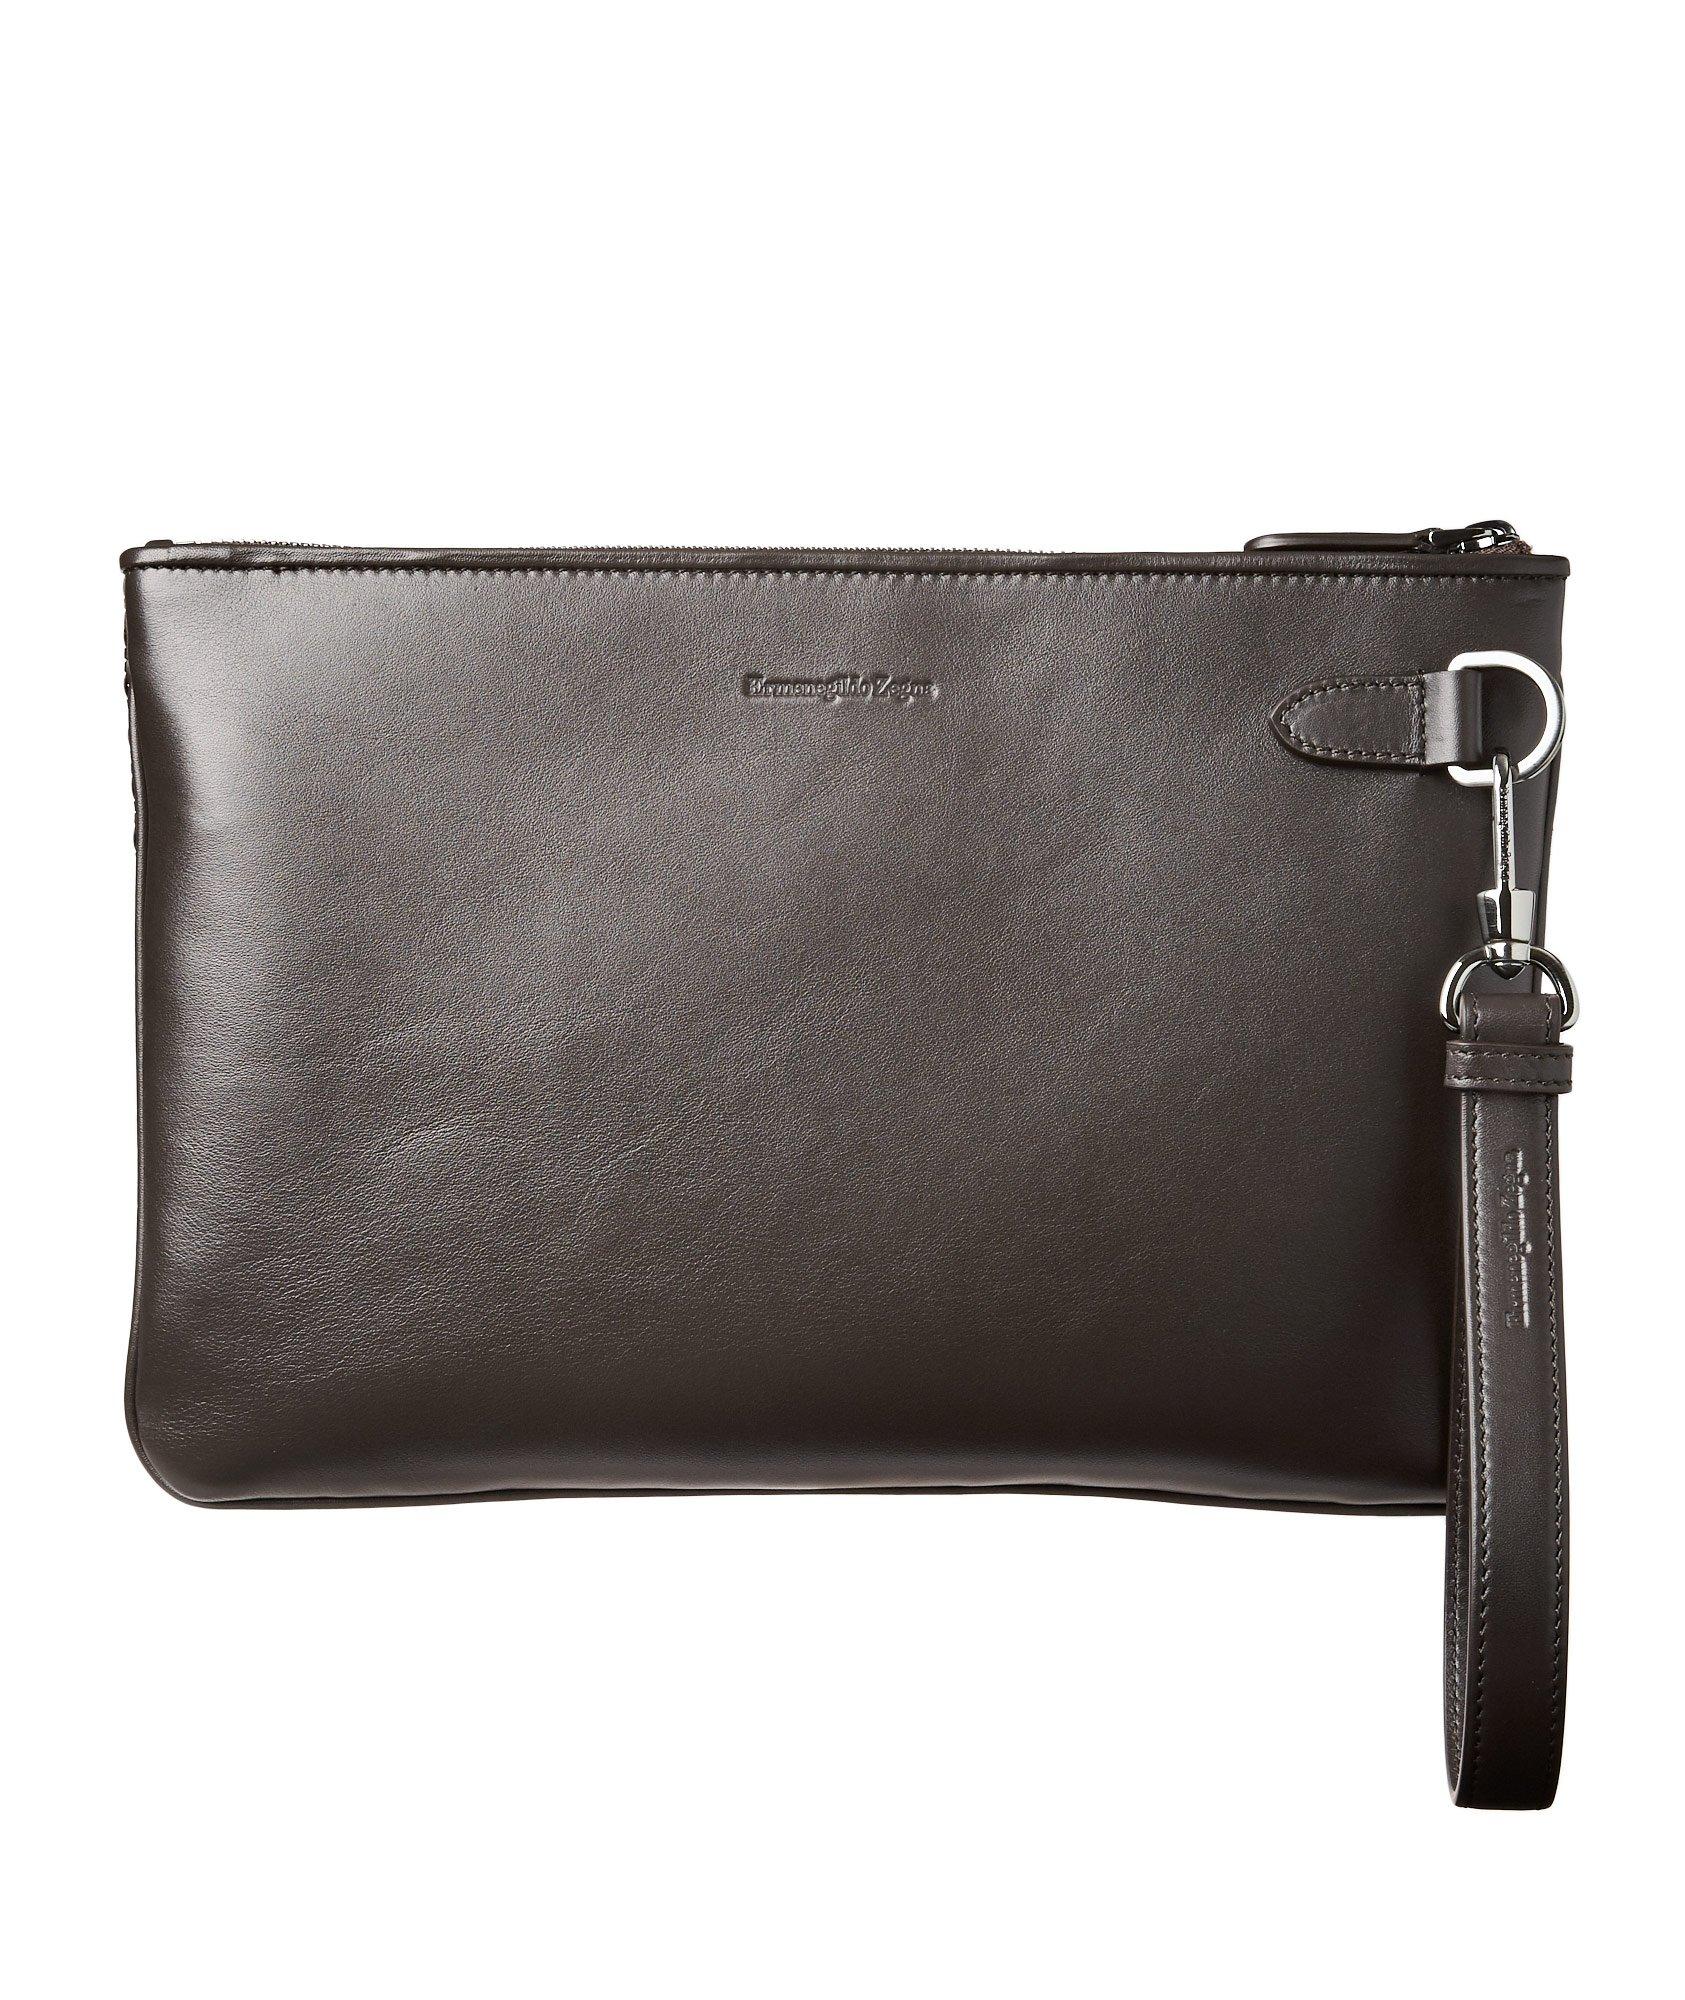 Leather Zip-Up Maserati Pouch image 1